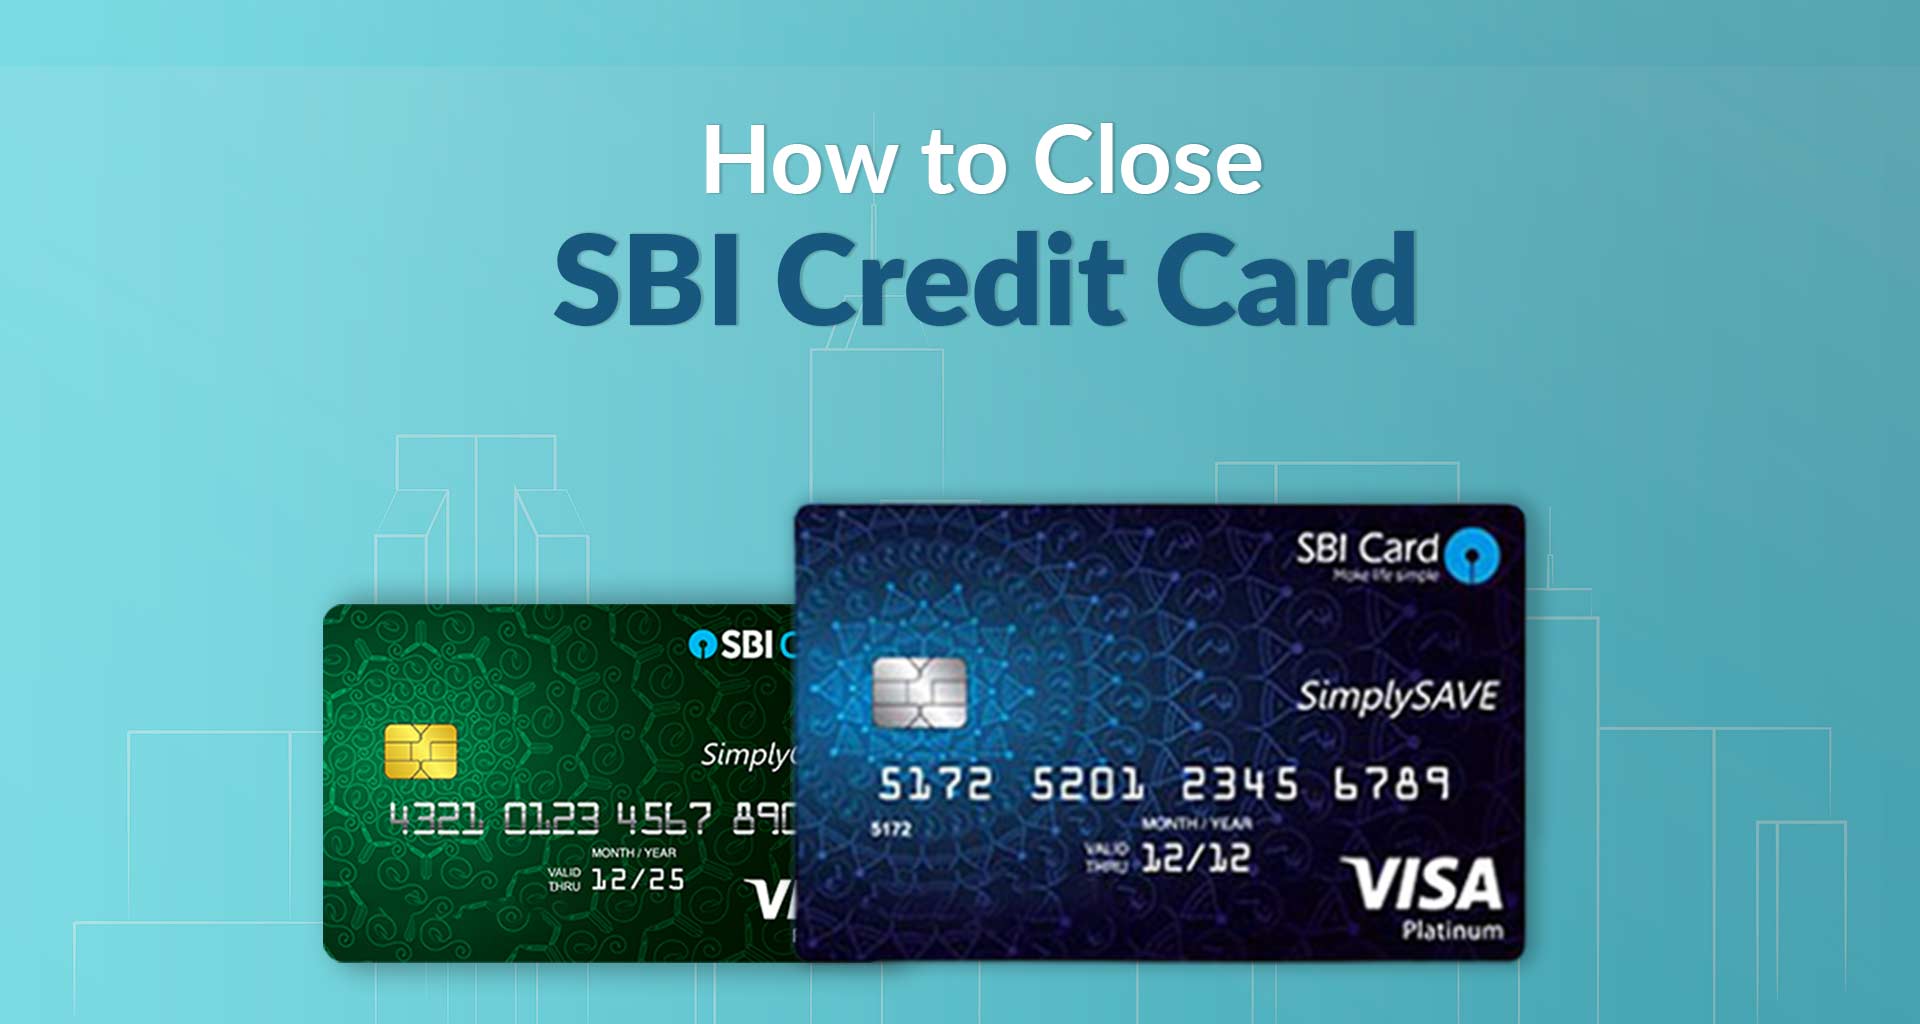 How to close SBI credit card: What You Need to Know